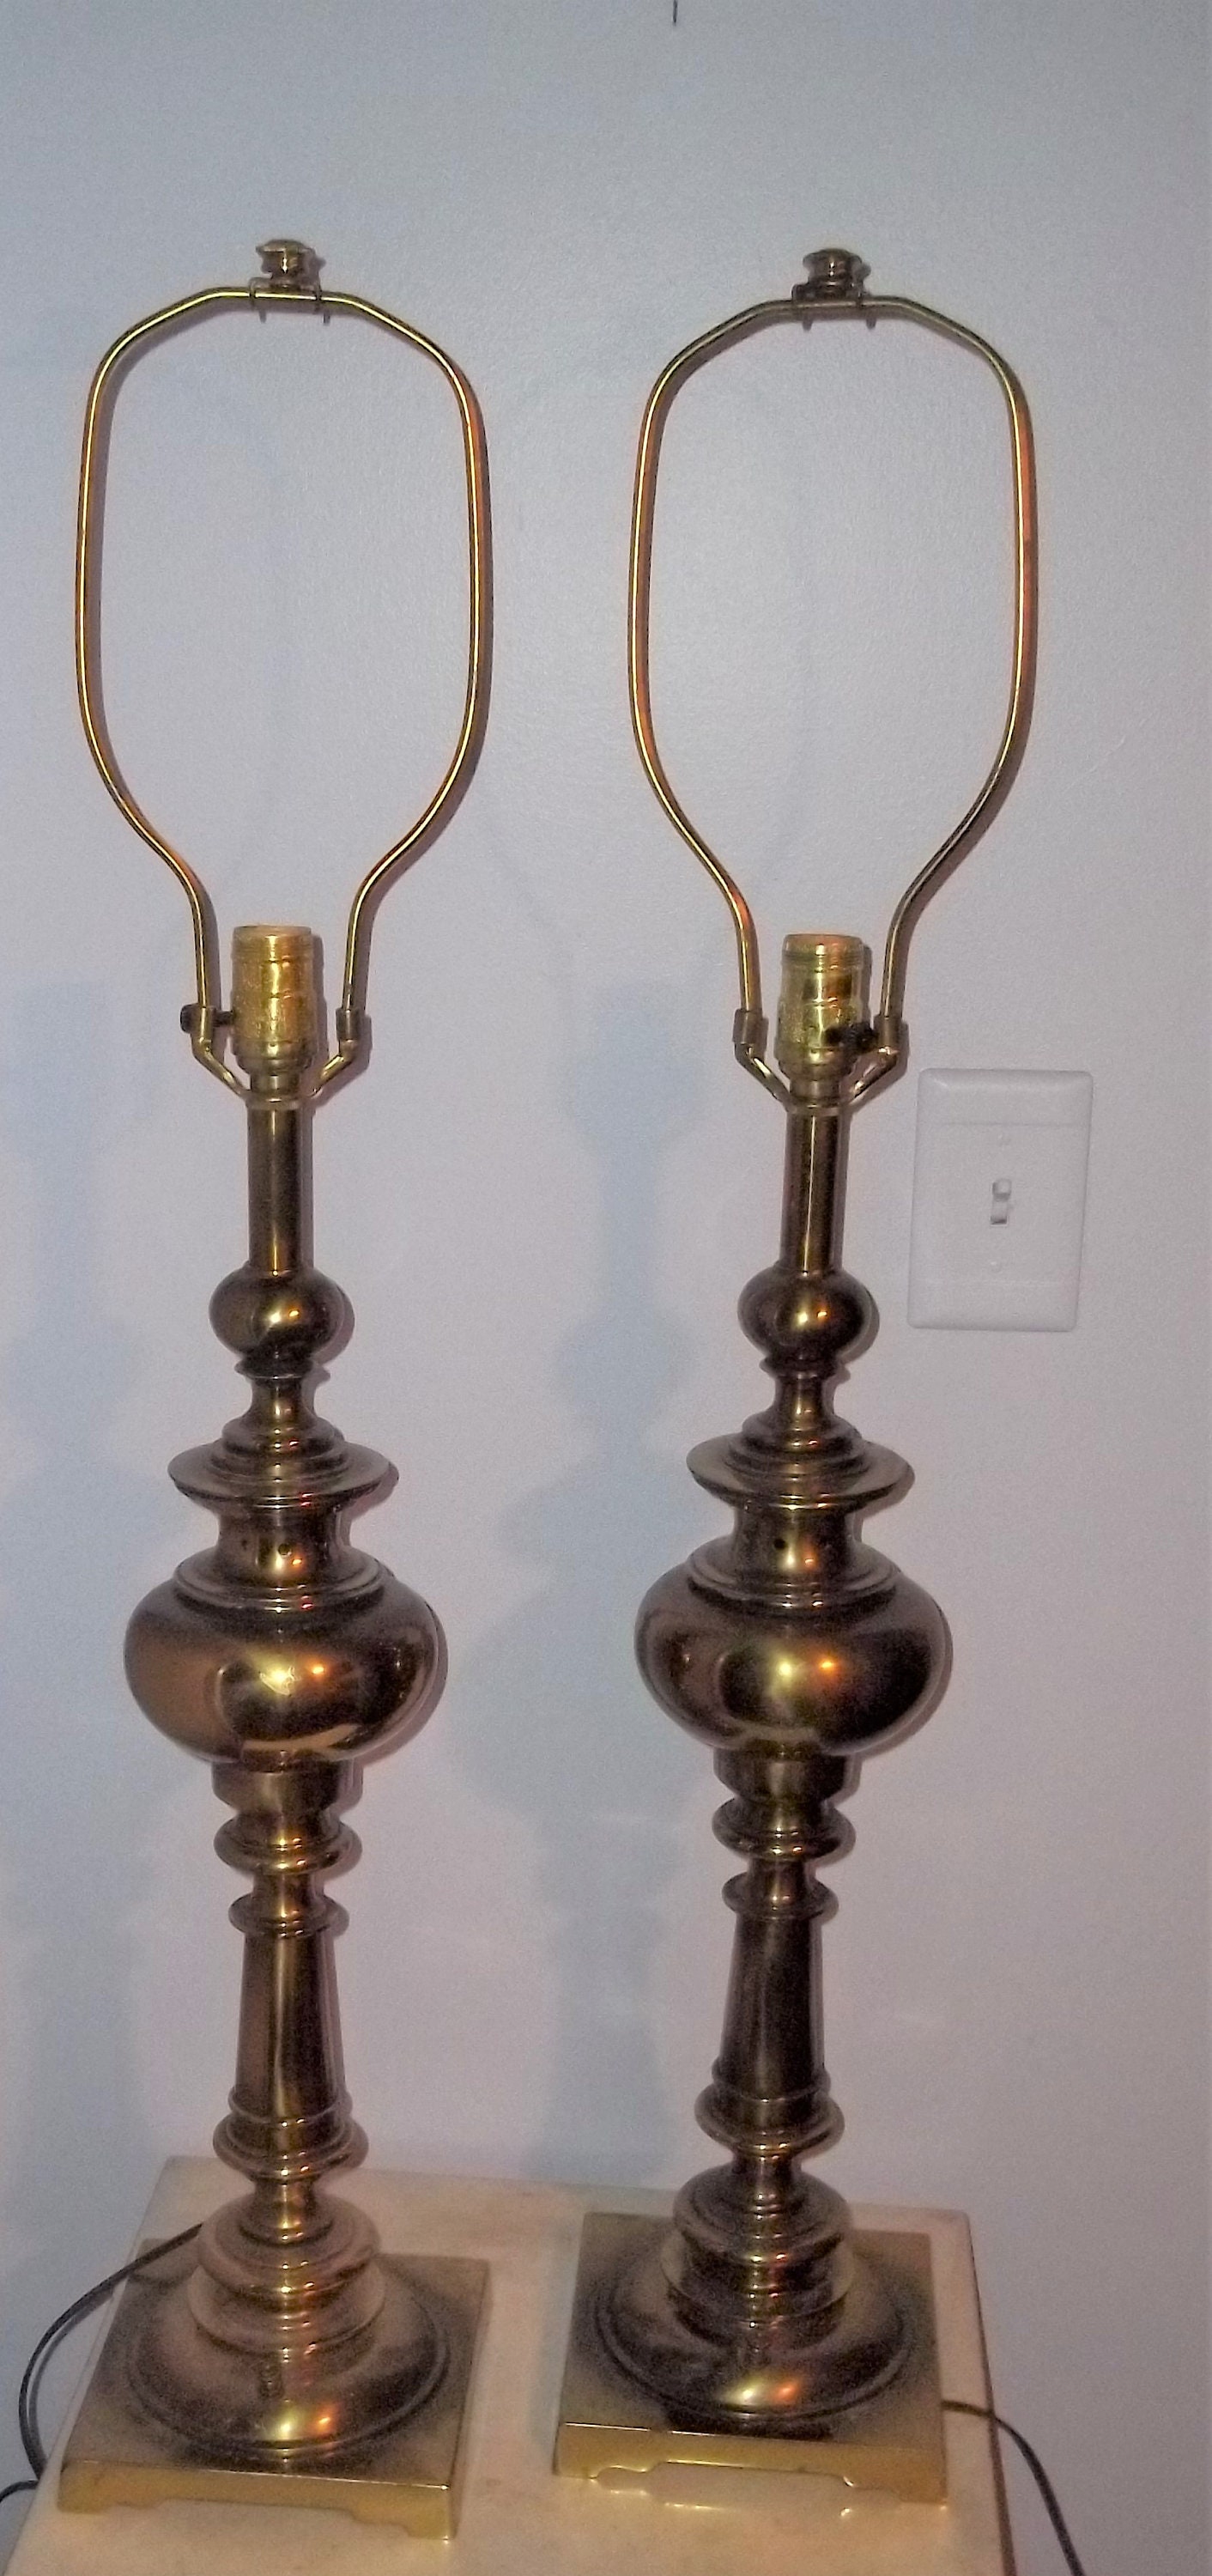 Vintage Brass Table Lamps by Stiffel, 1970s, Pair FREE DOMESTIC SHIPPING 